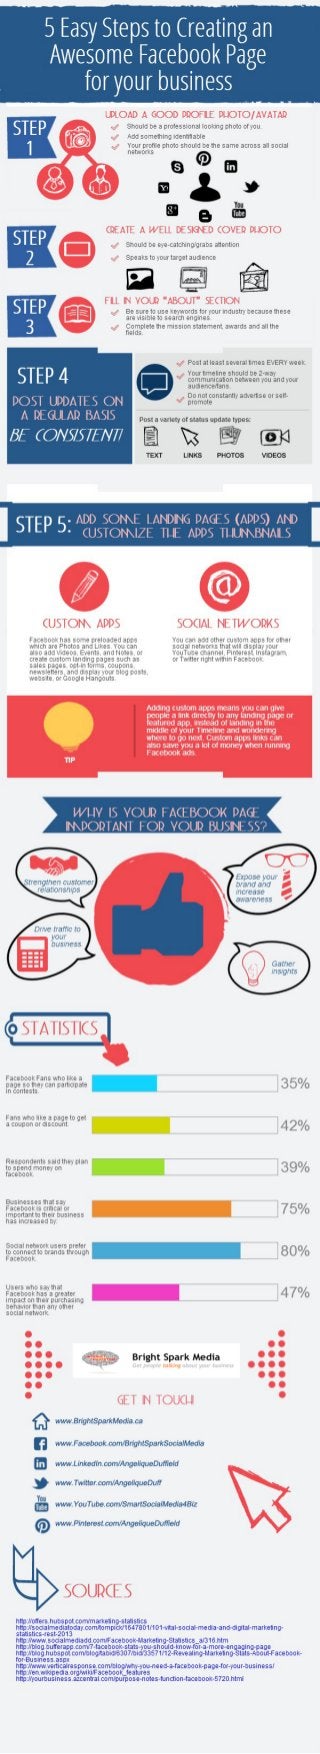 Easy Facebook Pages for your Business - infographic